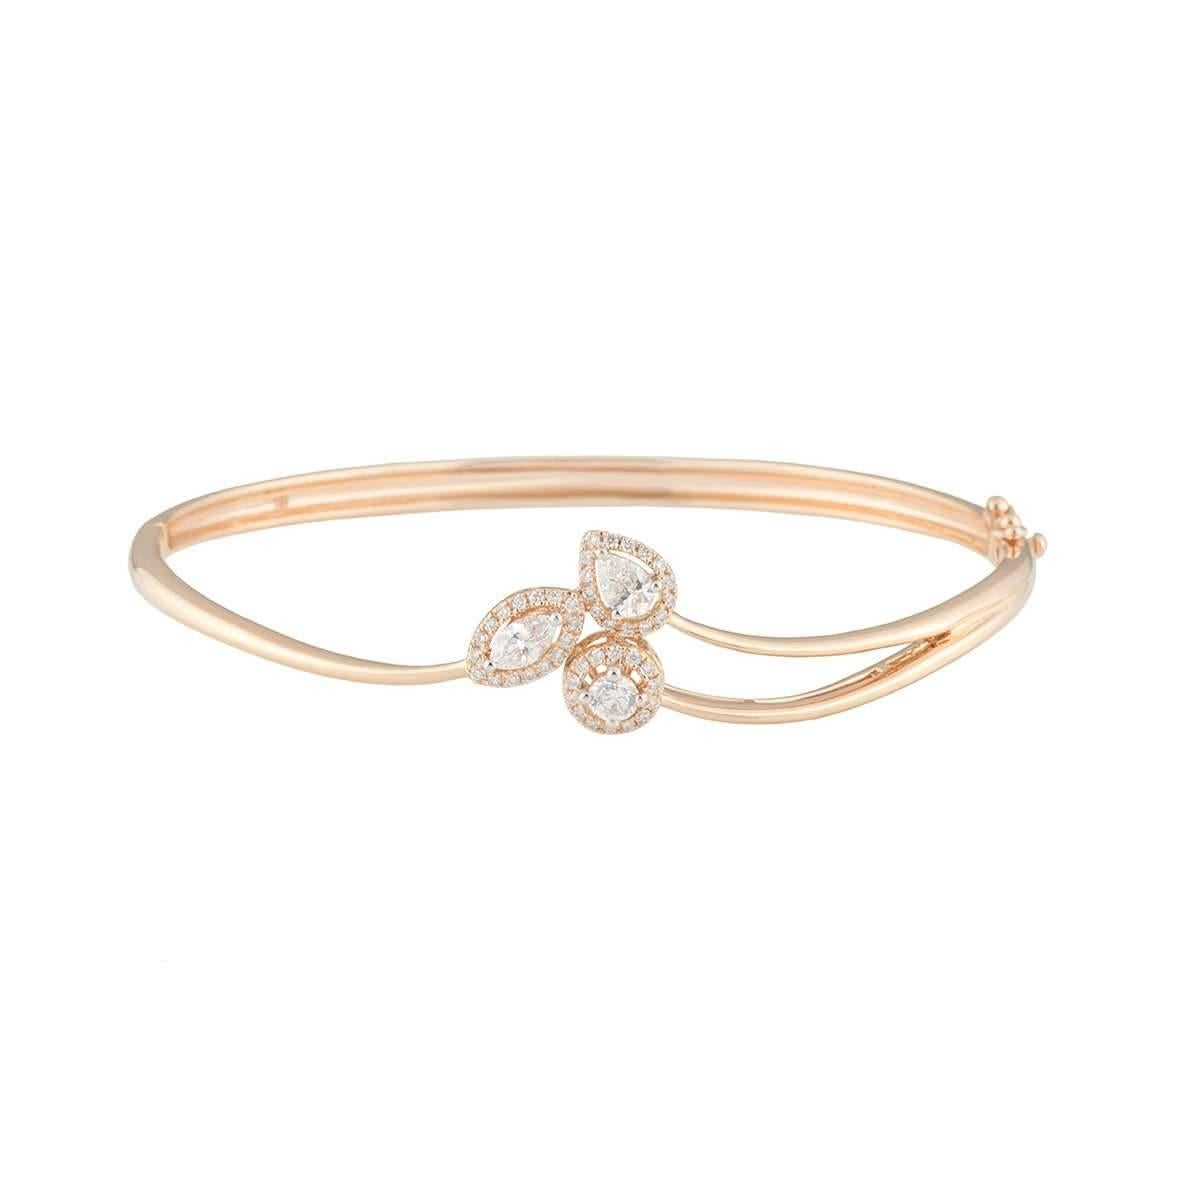 A lovely 18k rose gold diamond bangle. The bangle comprises of round brilliant cut, pear cut and marquise cut diamonds with a halo of diamonds around each. The diamonds have a total weight of 2.07ct, G-H colour and VS-VVS clarity. The bangle